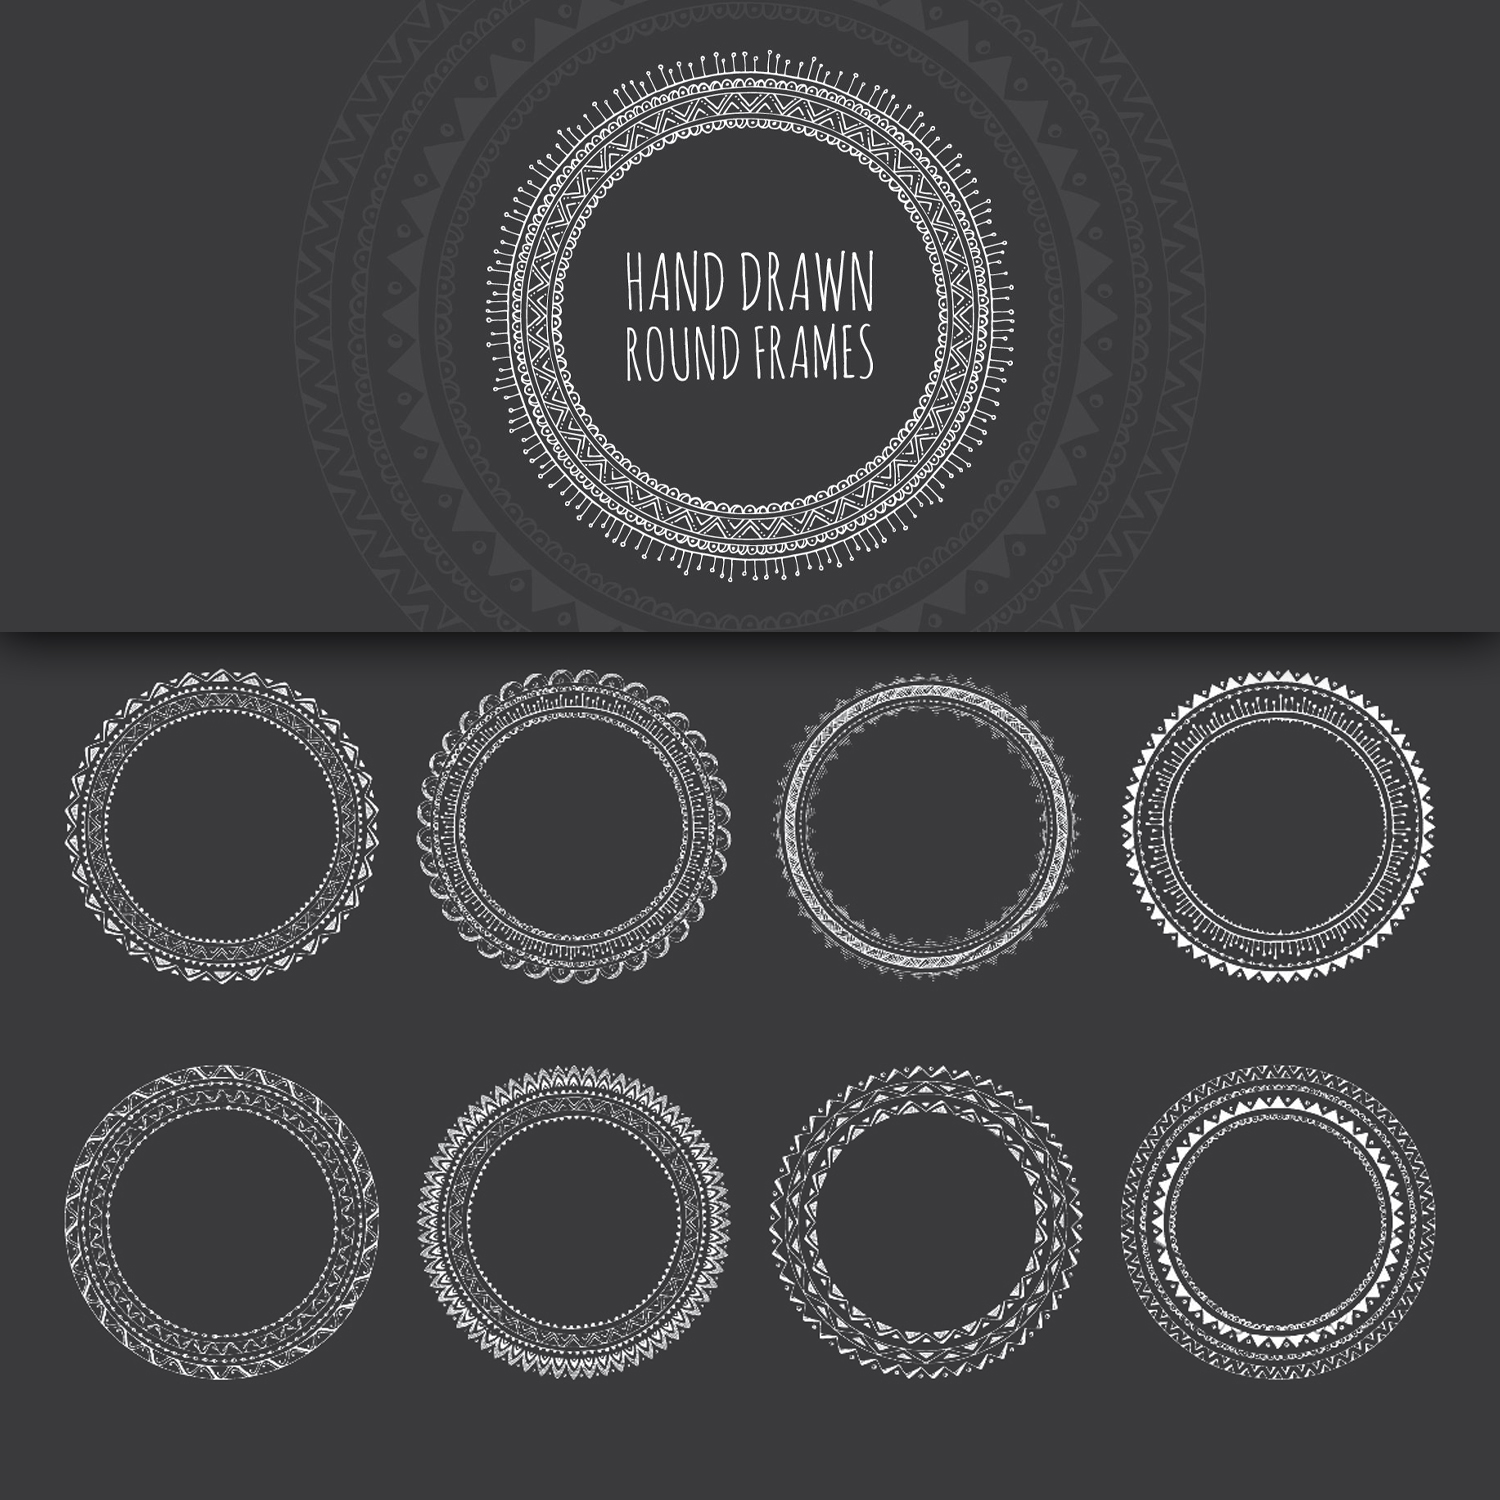 Preview hand drawn decorative round frames.